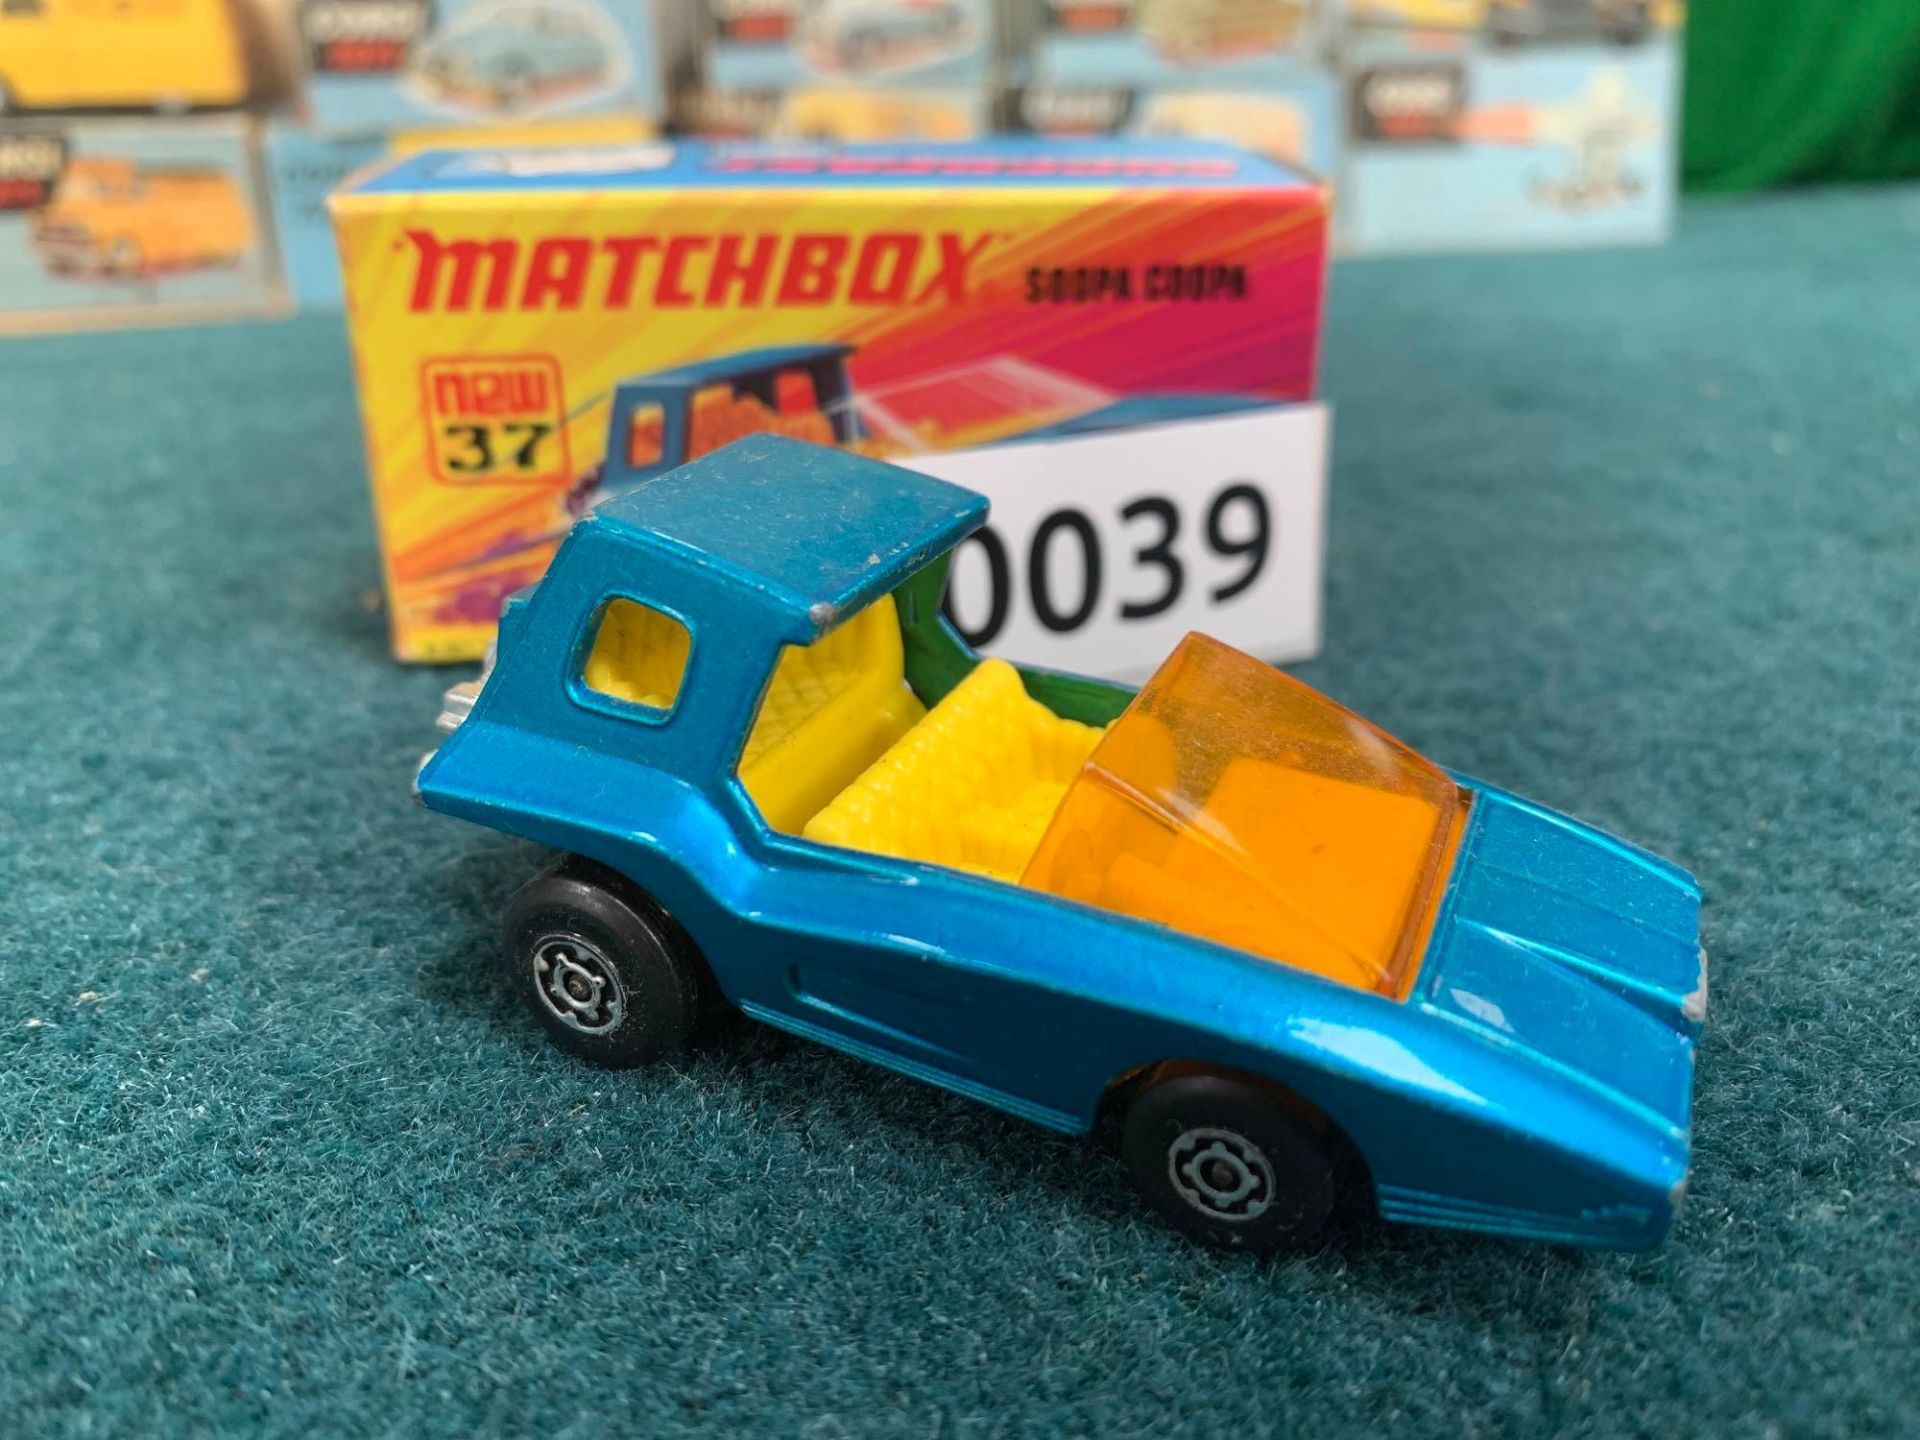 Matchbox 1972 Lesney Superfast Diecast Toy Car Soopa Coopa No. 37 - Image 3 of 4